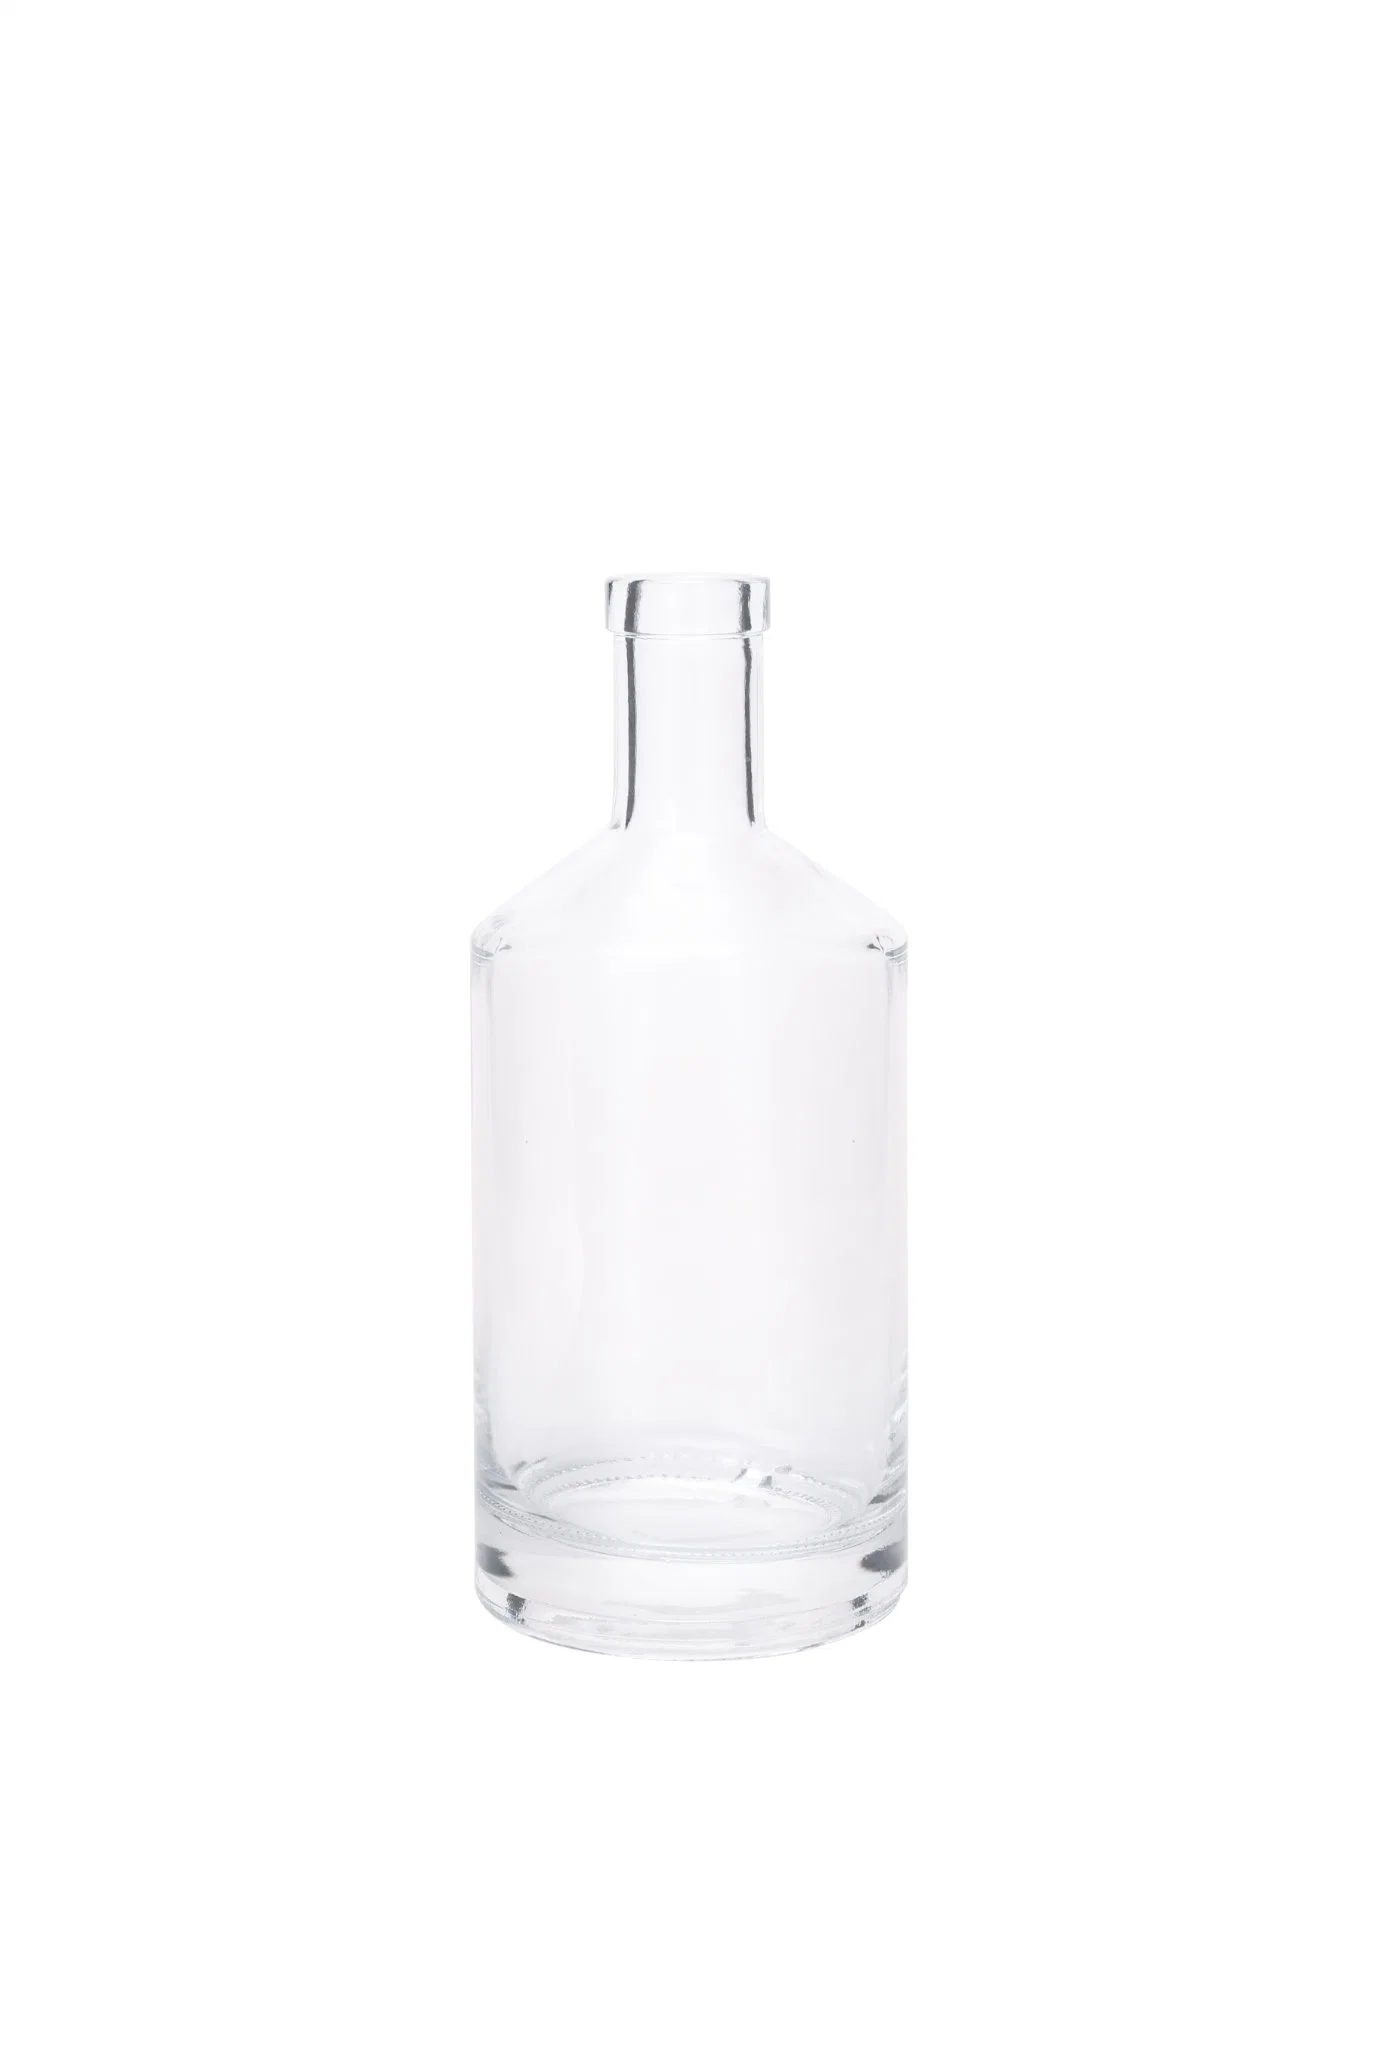 Factory Directly Price Full Sizes Clear Food Storage Jars Glass in Stocks